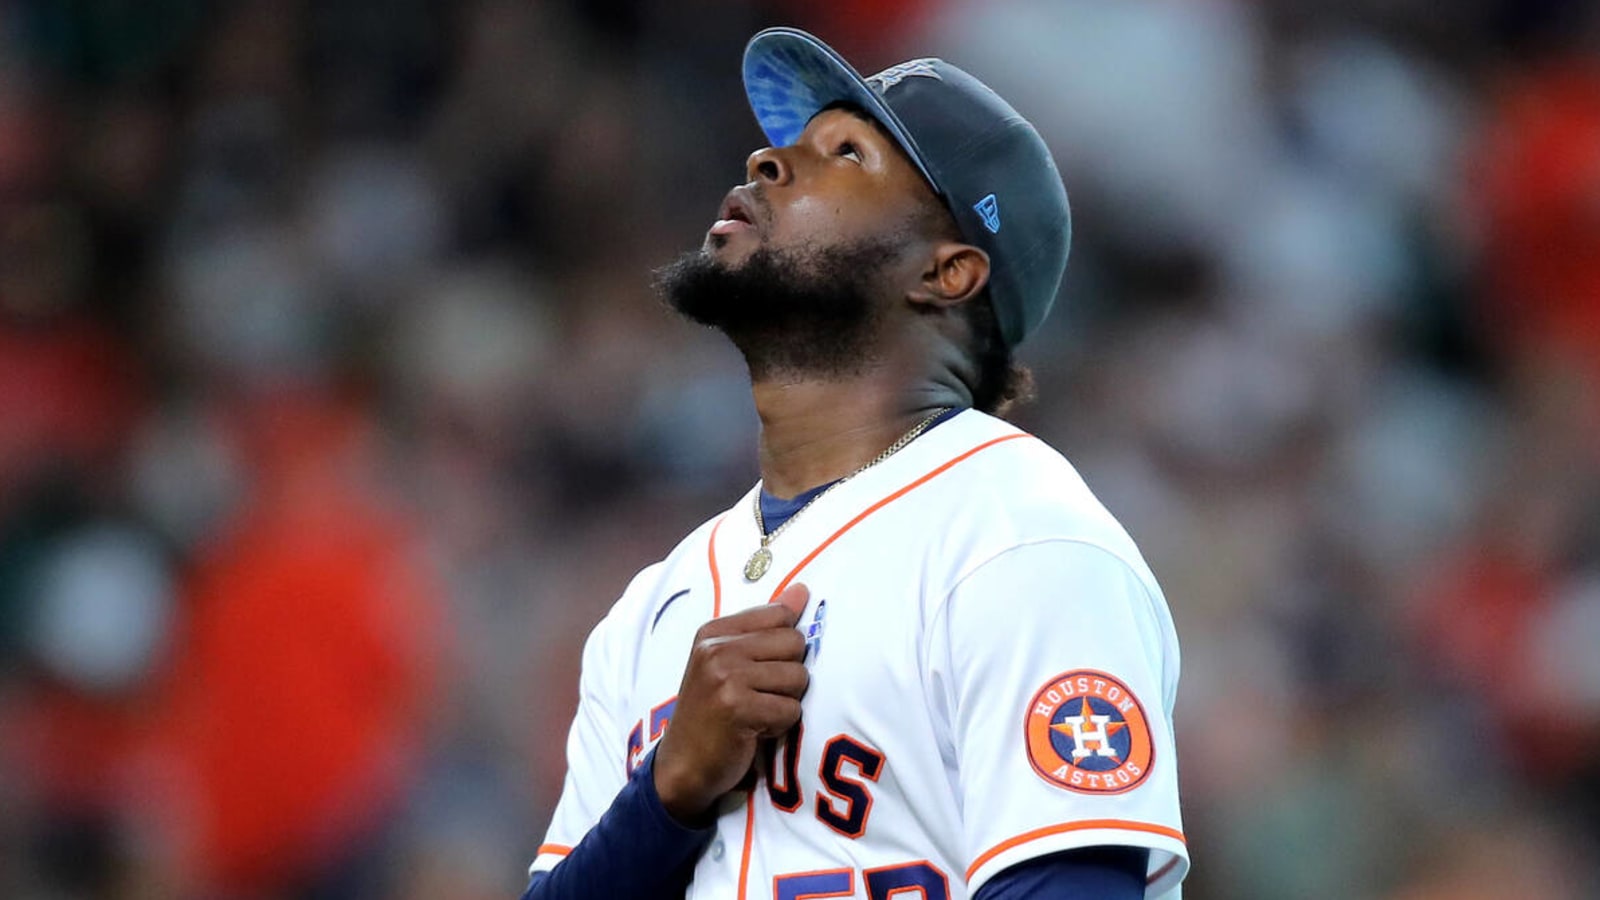 Cristian Javier leads Astros to second no-hitter against Yankees